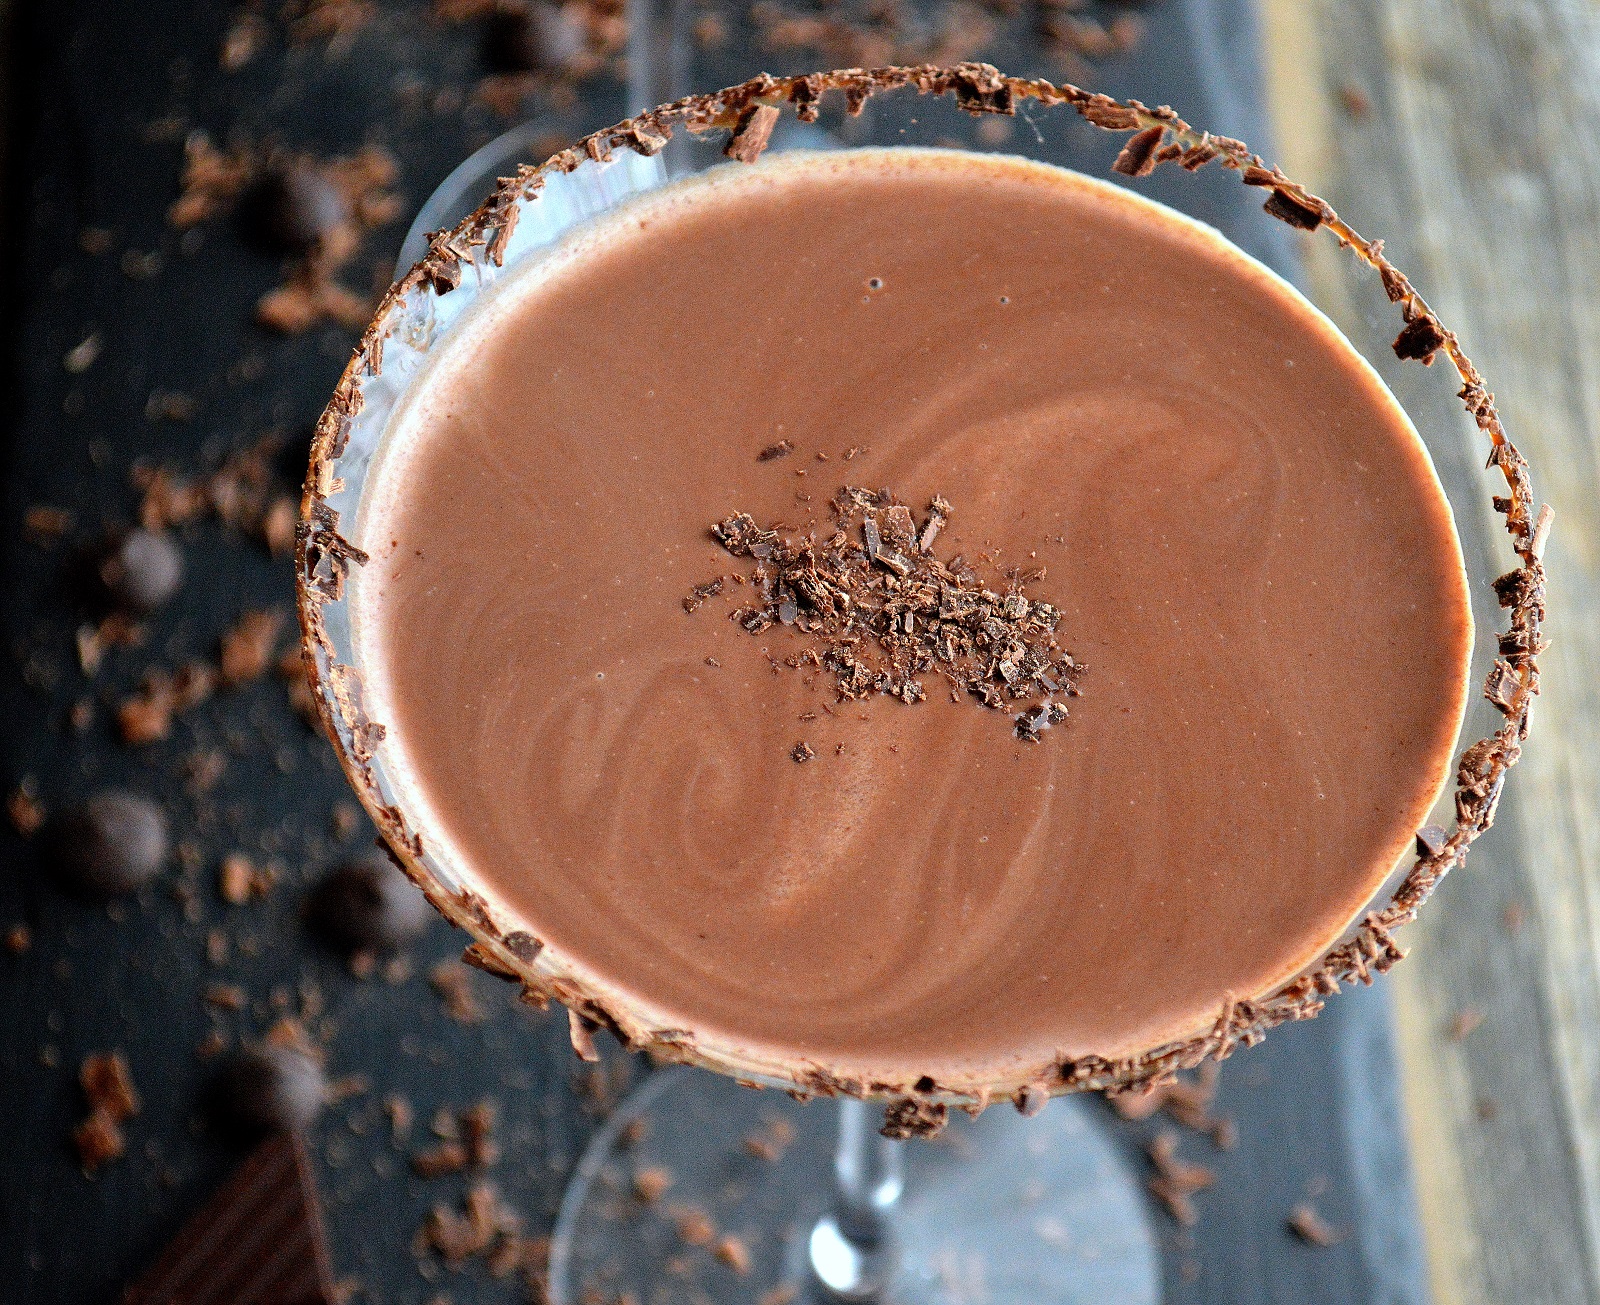 To Die For Chocolate Martini Recipe, this is everything you want it to be!